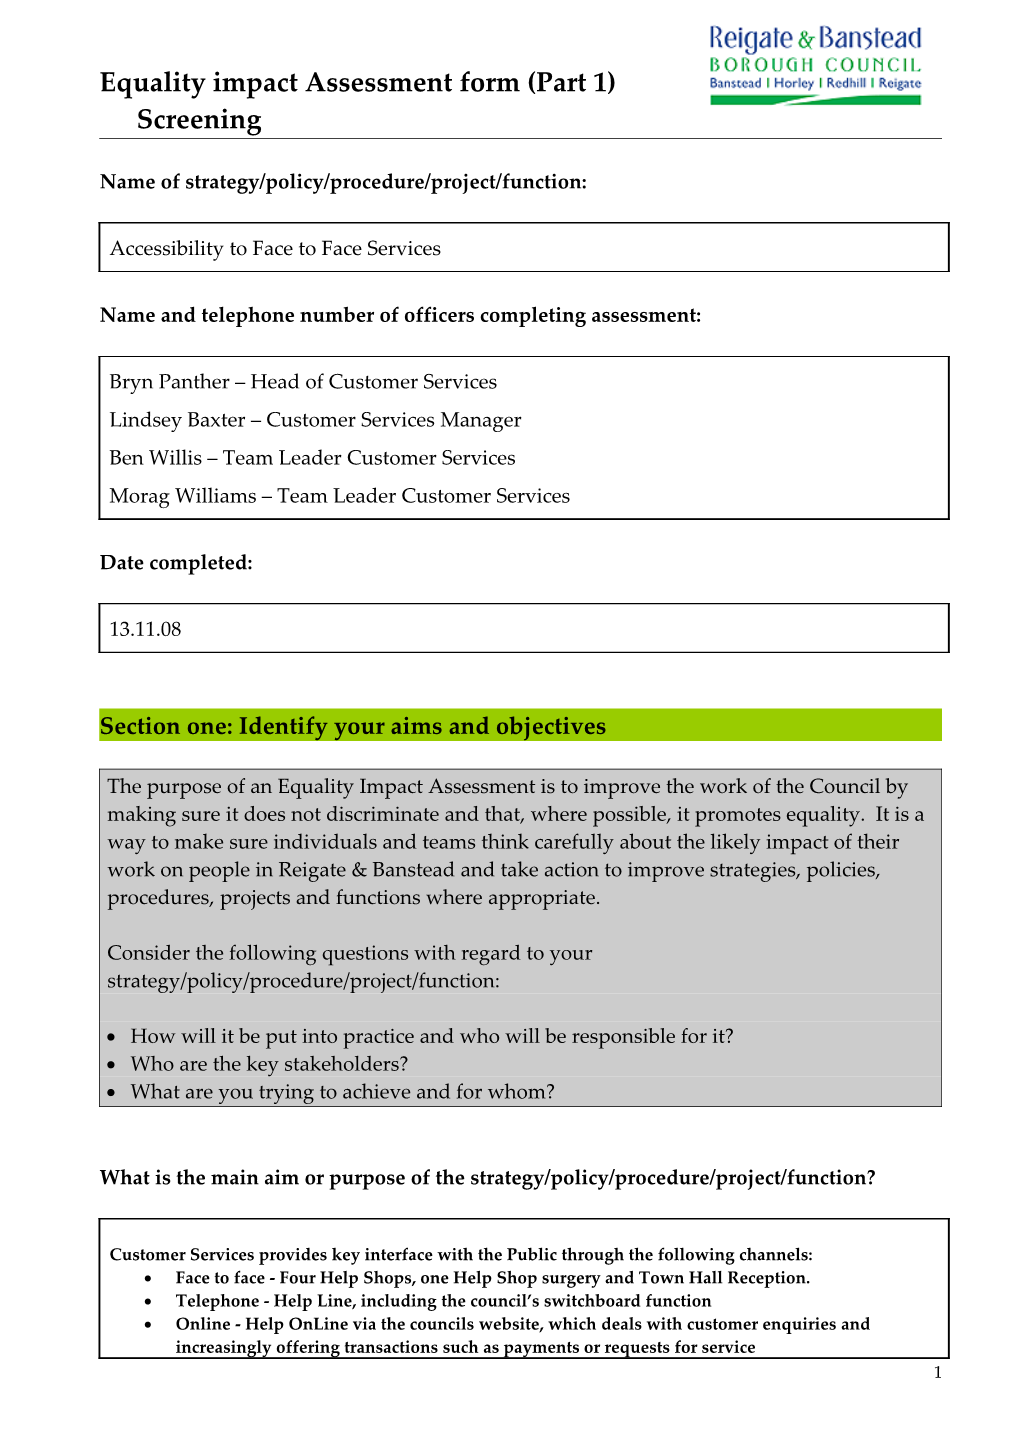 Equality Impact Assessment Form (Part 1) s1